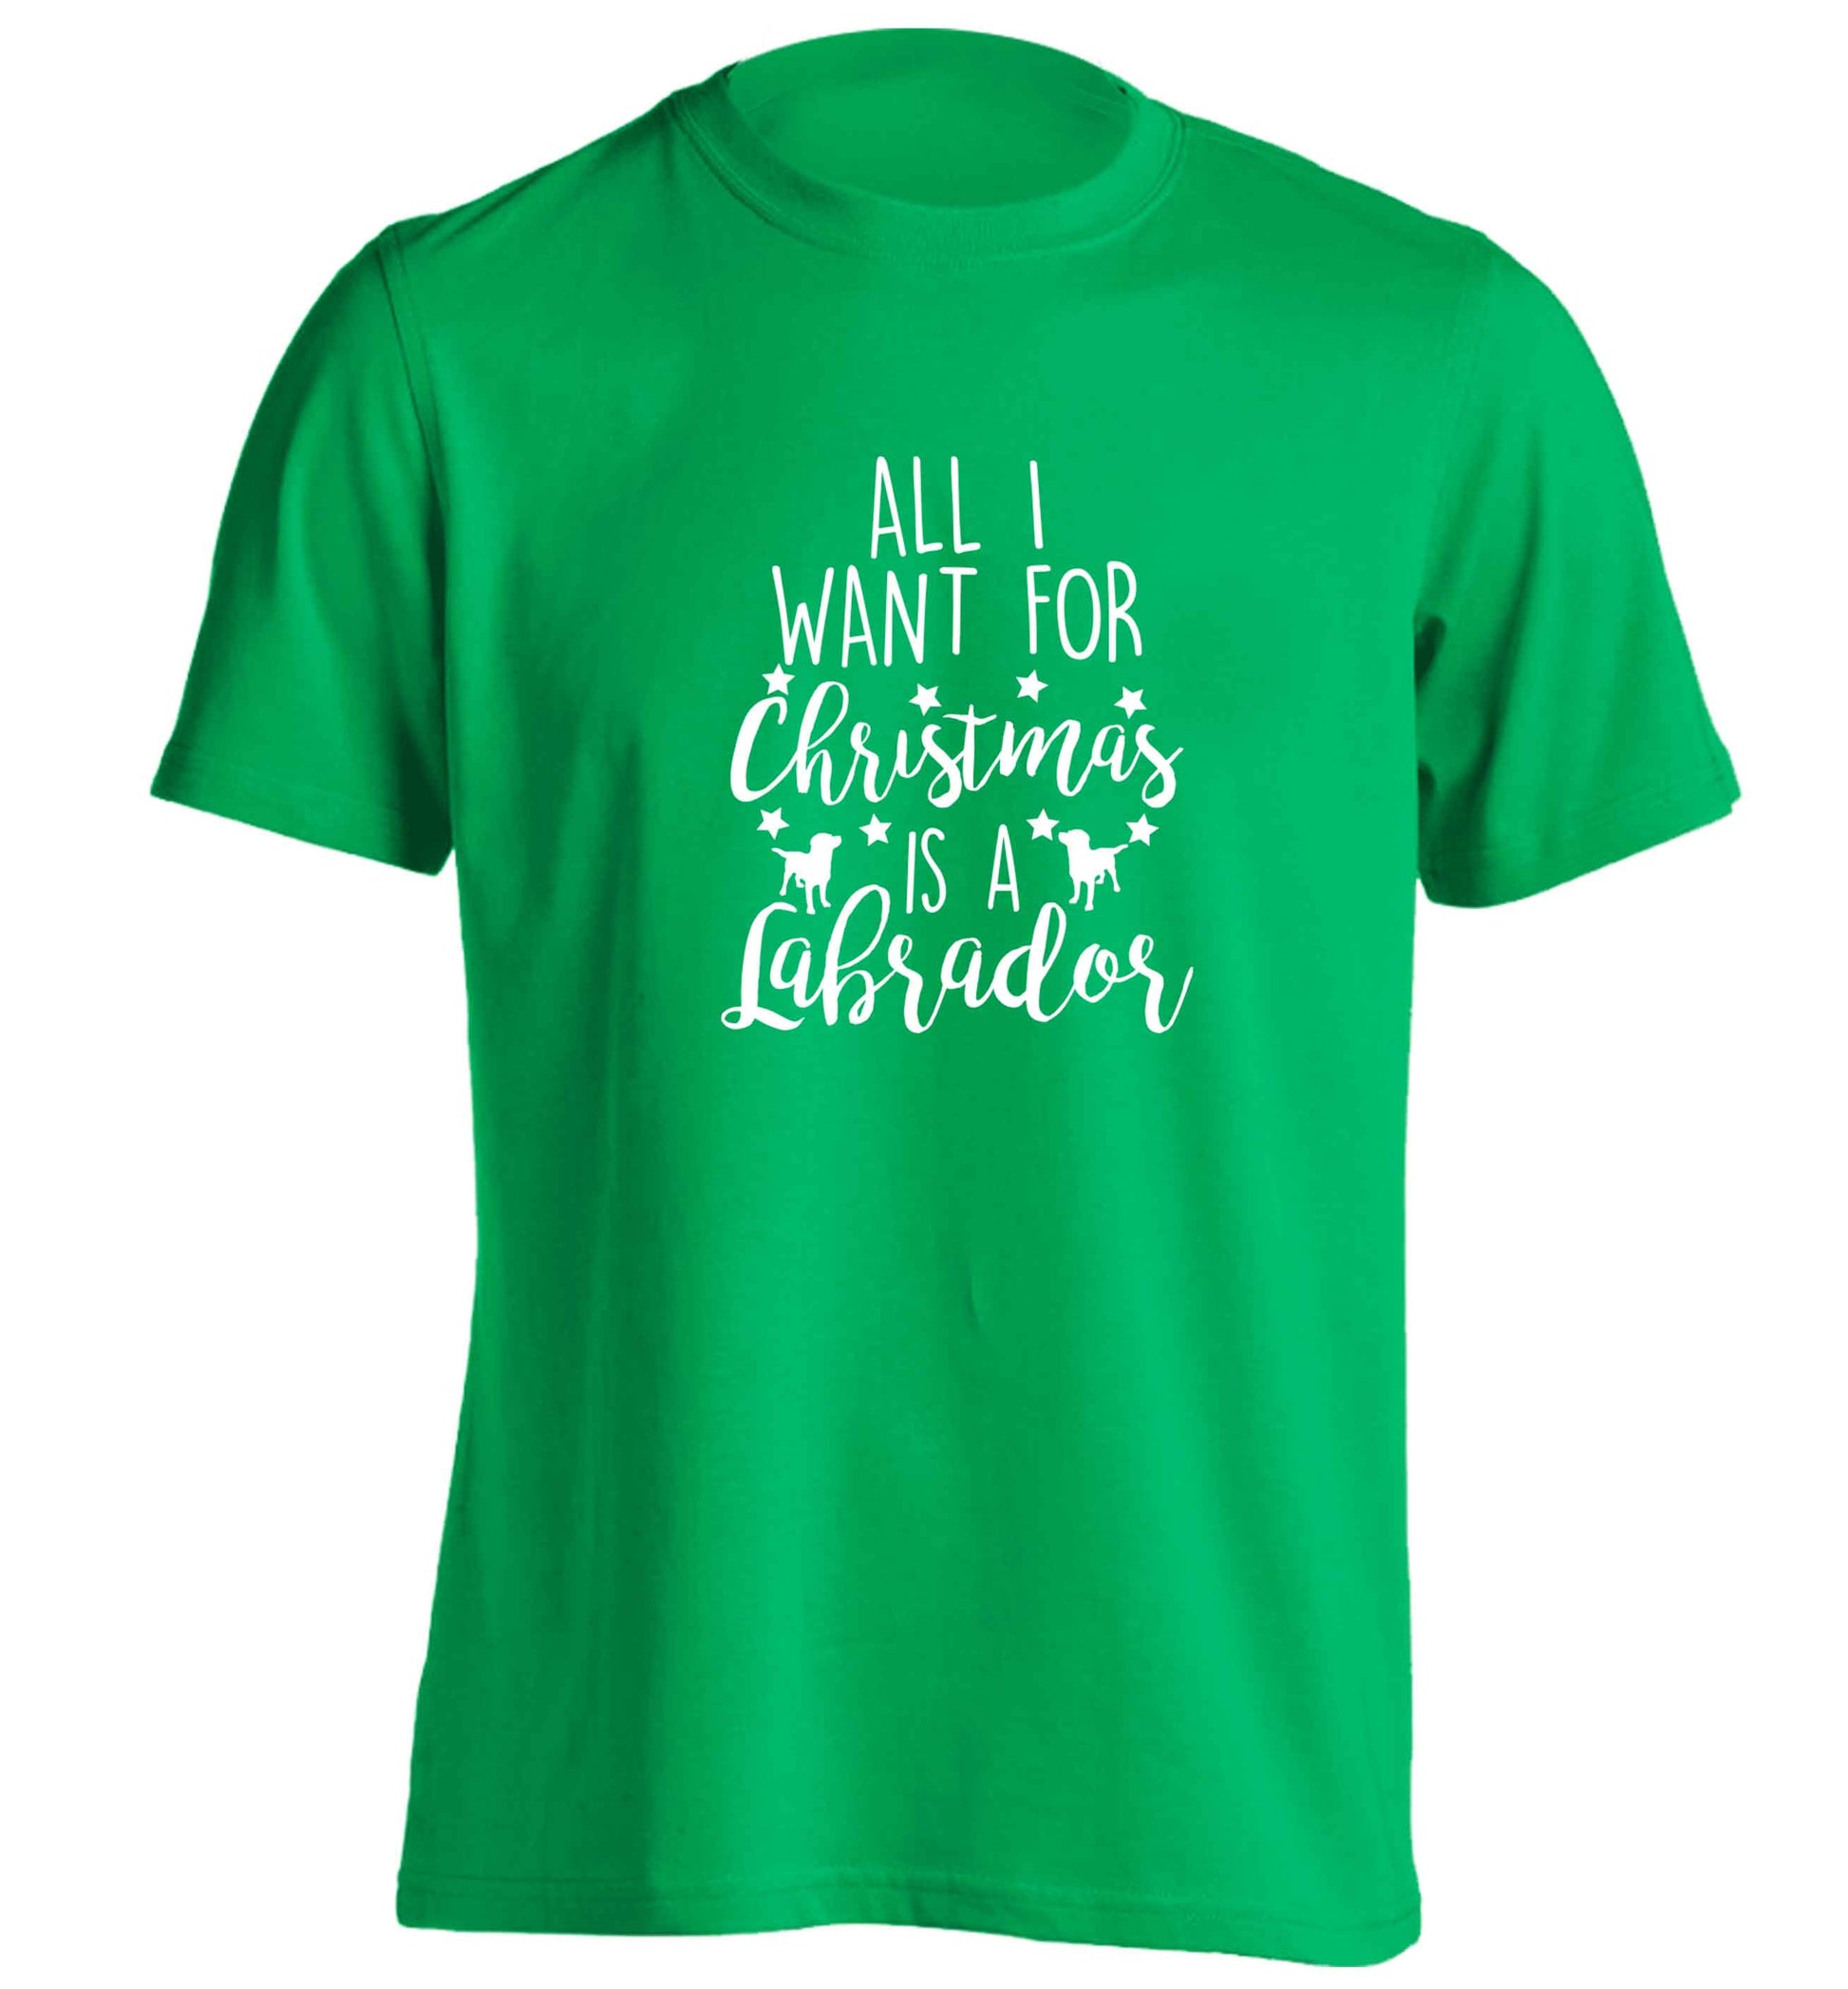 All I want for Christmas is a labrador adults unisex green Tshirt 2XL